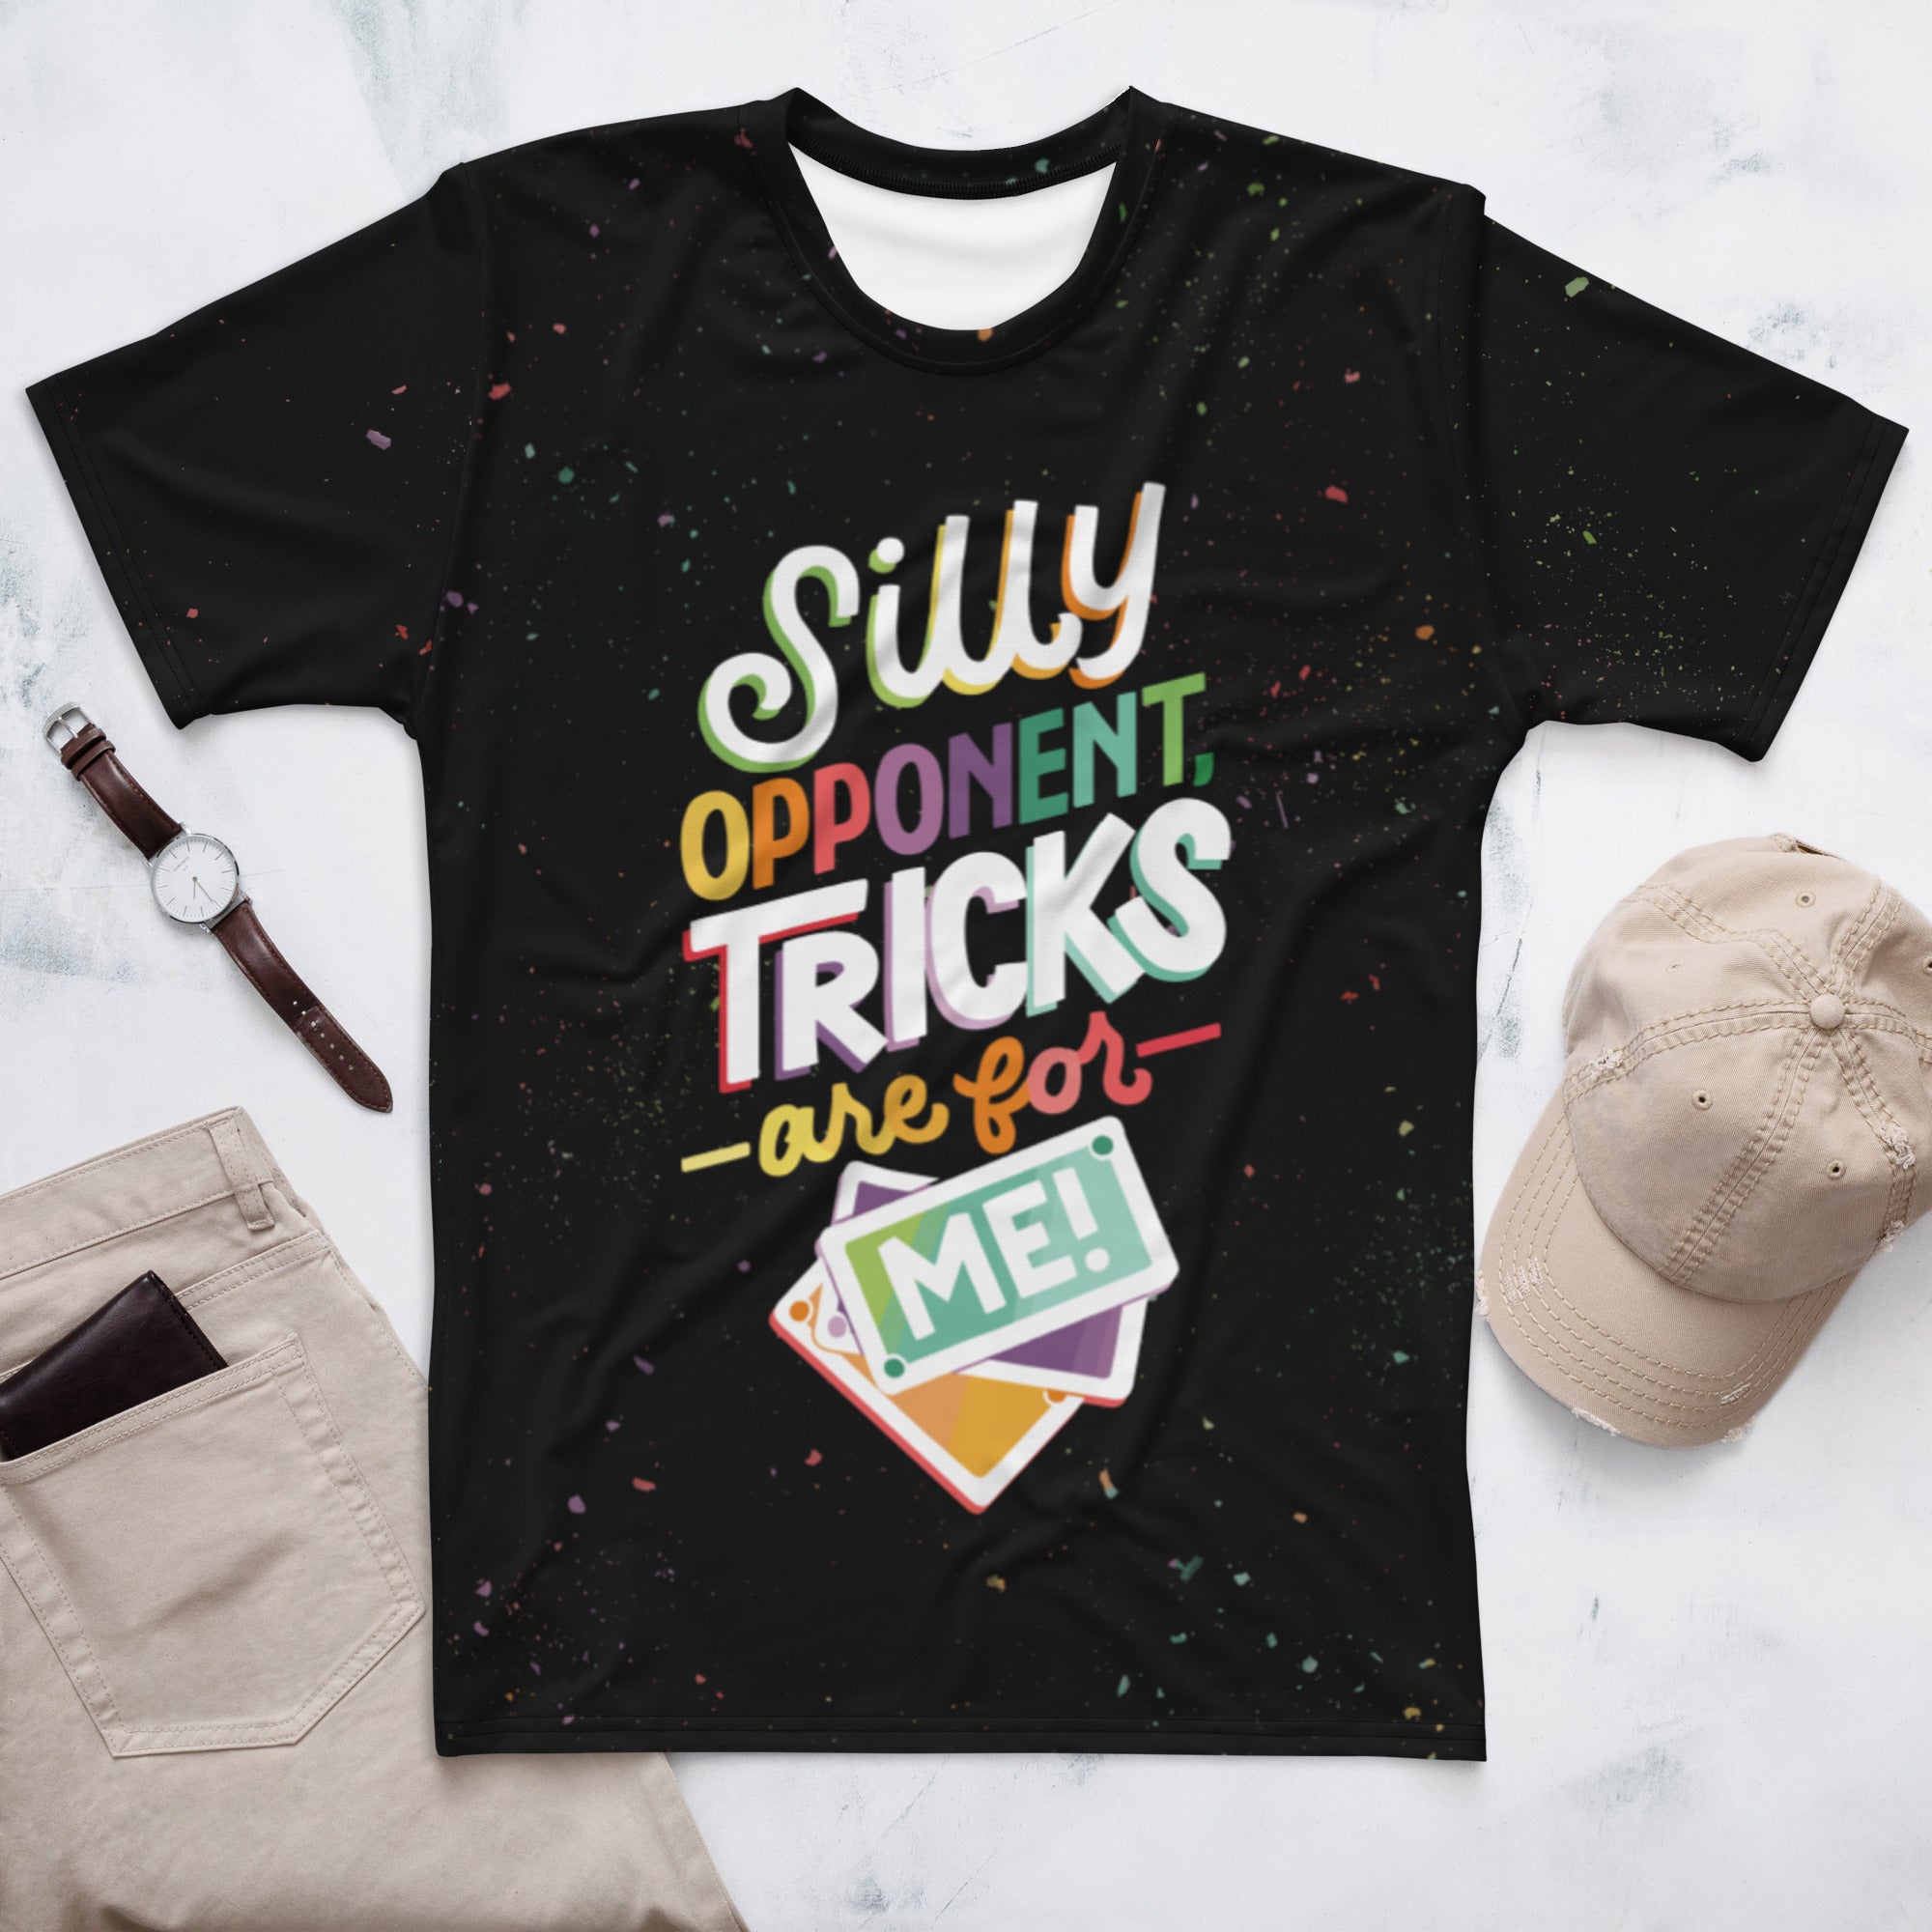 Silly Opponent, Tricks are for Me! Unisex AOP T-Shirt